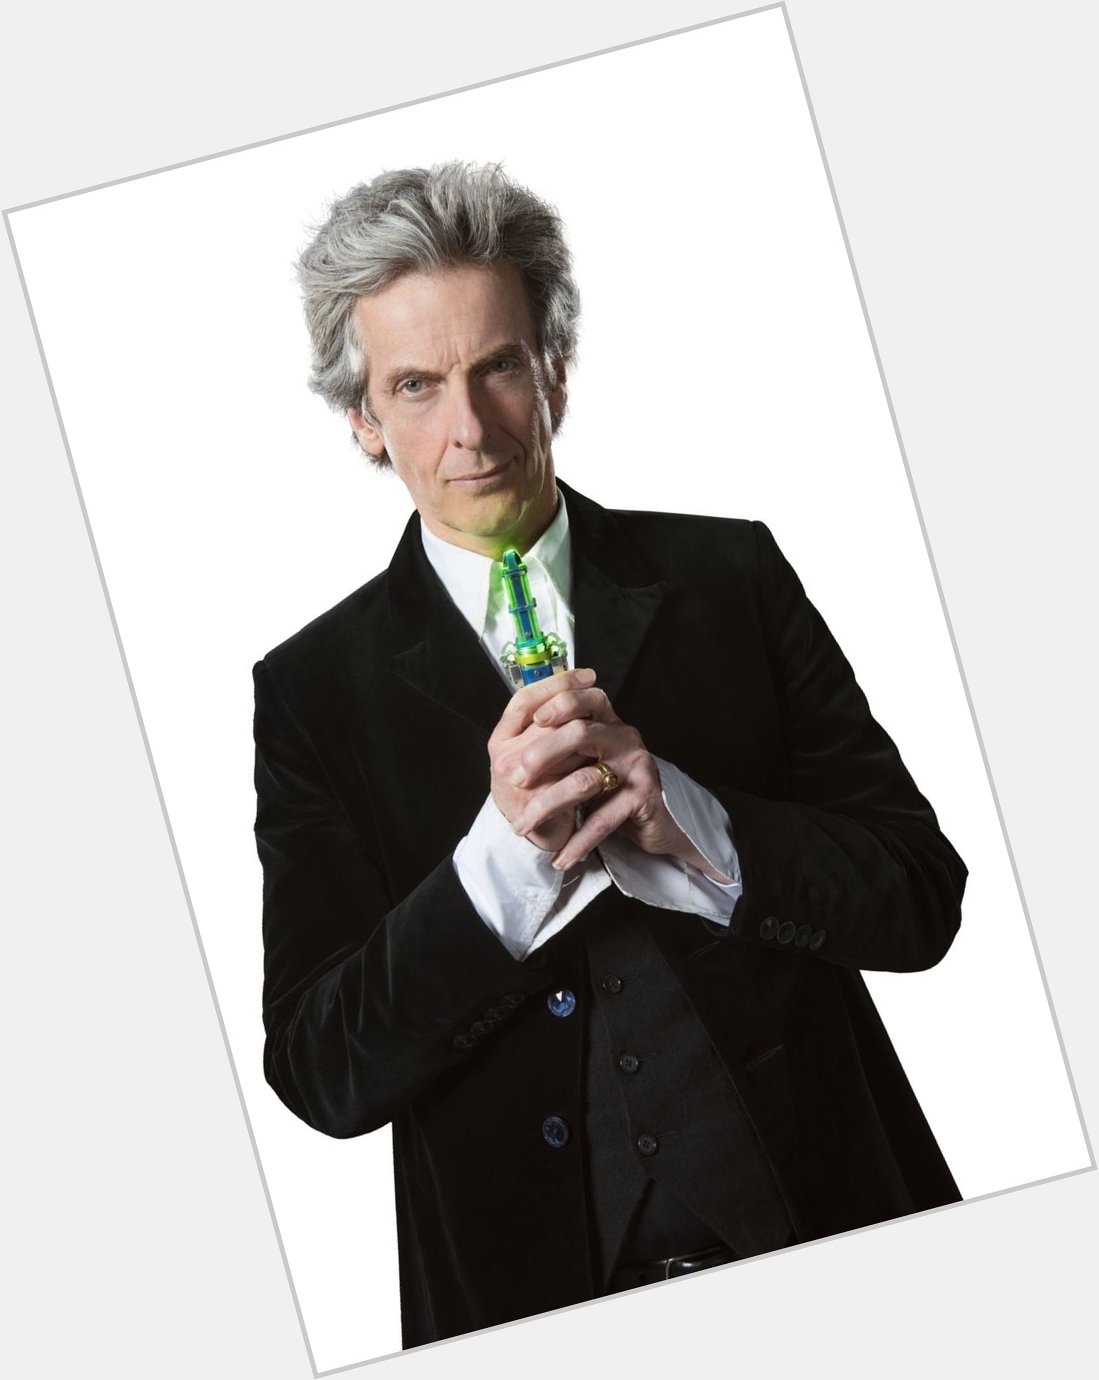 Happy Birthday to Peter Capaldi who plays the 12th Doctor. 